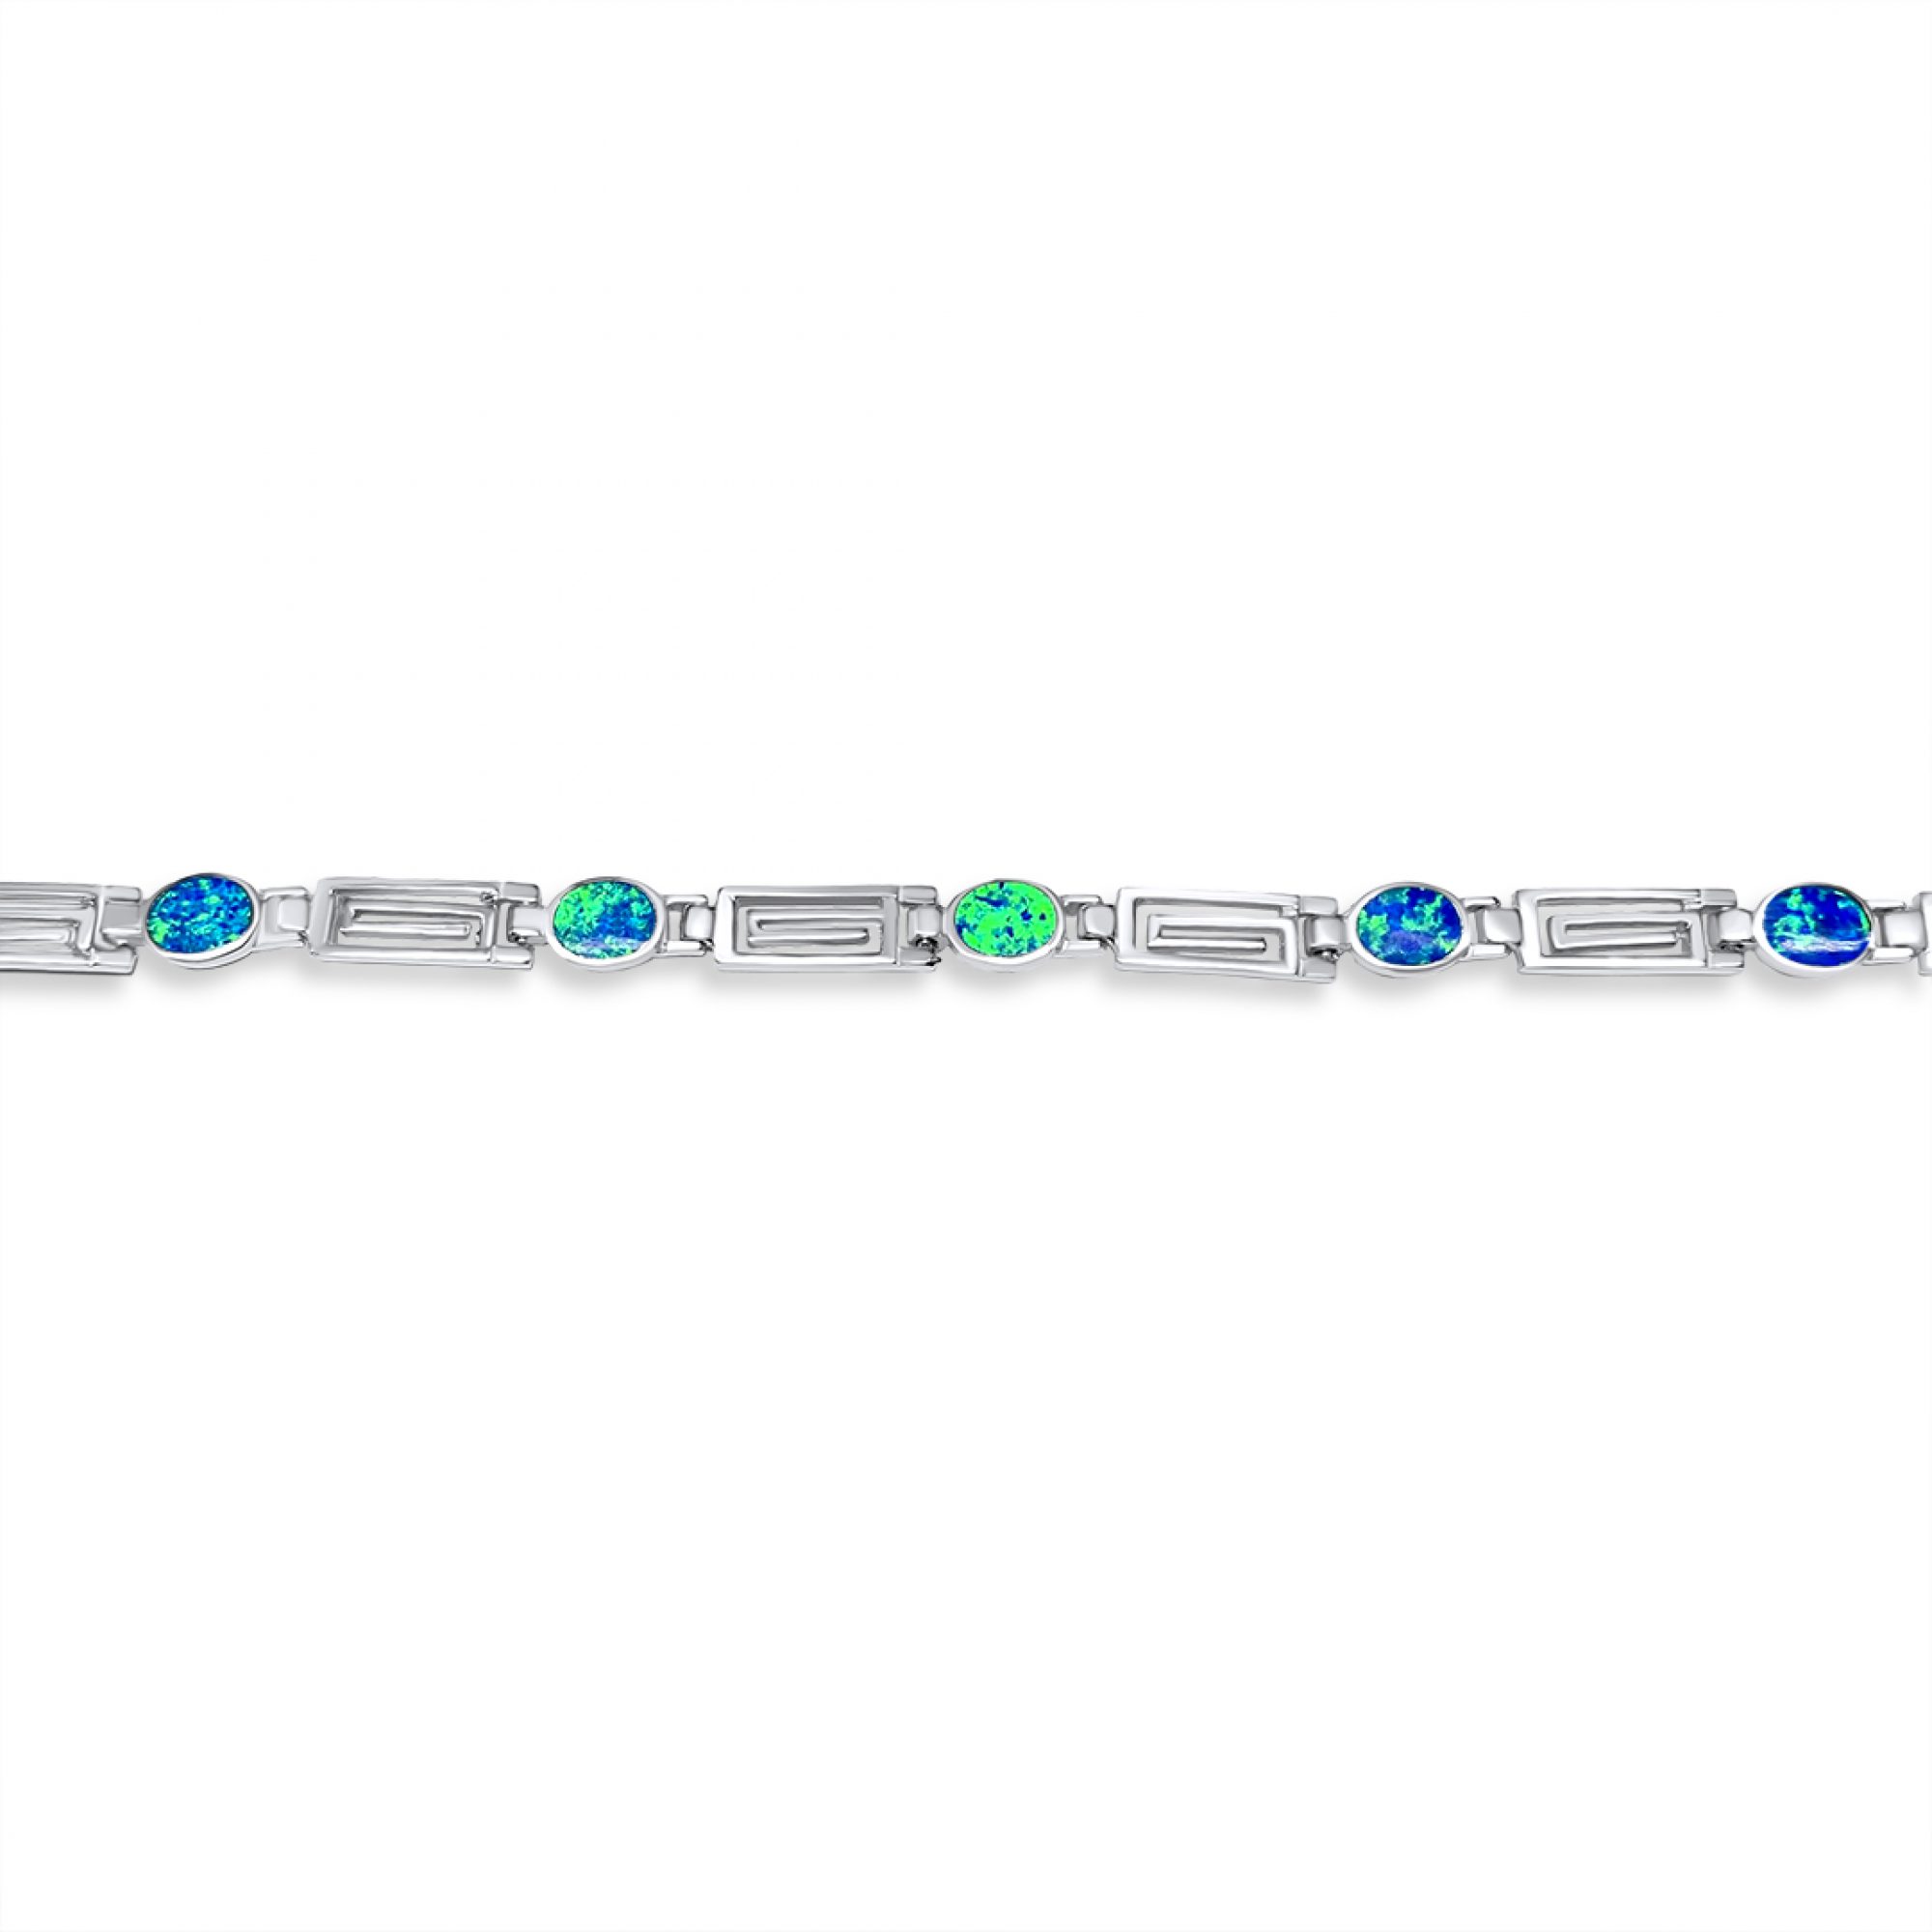 Bracelet with opal stones and meander